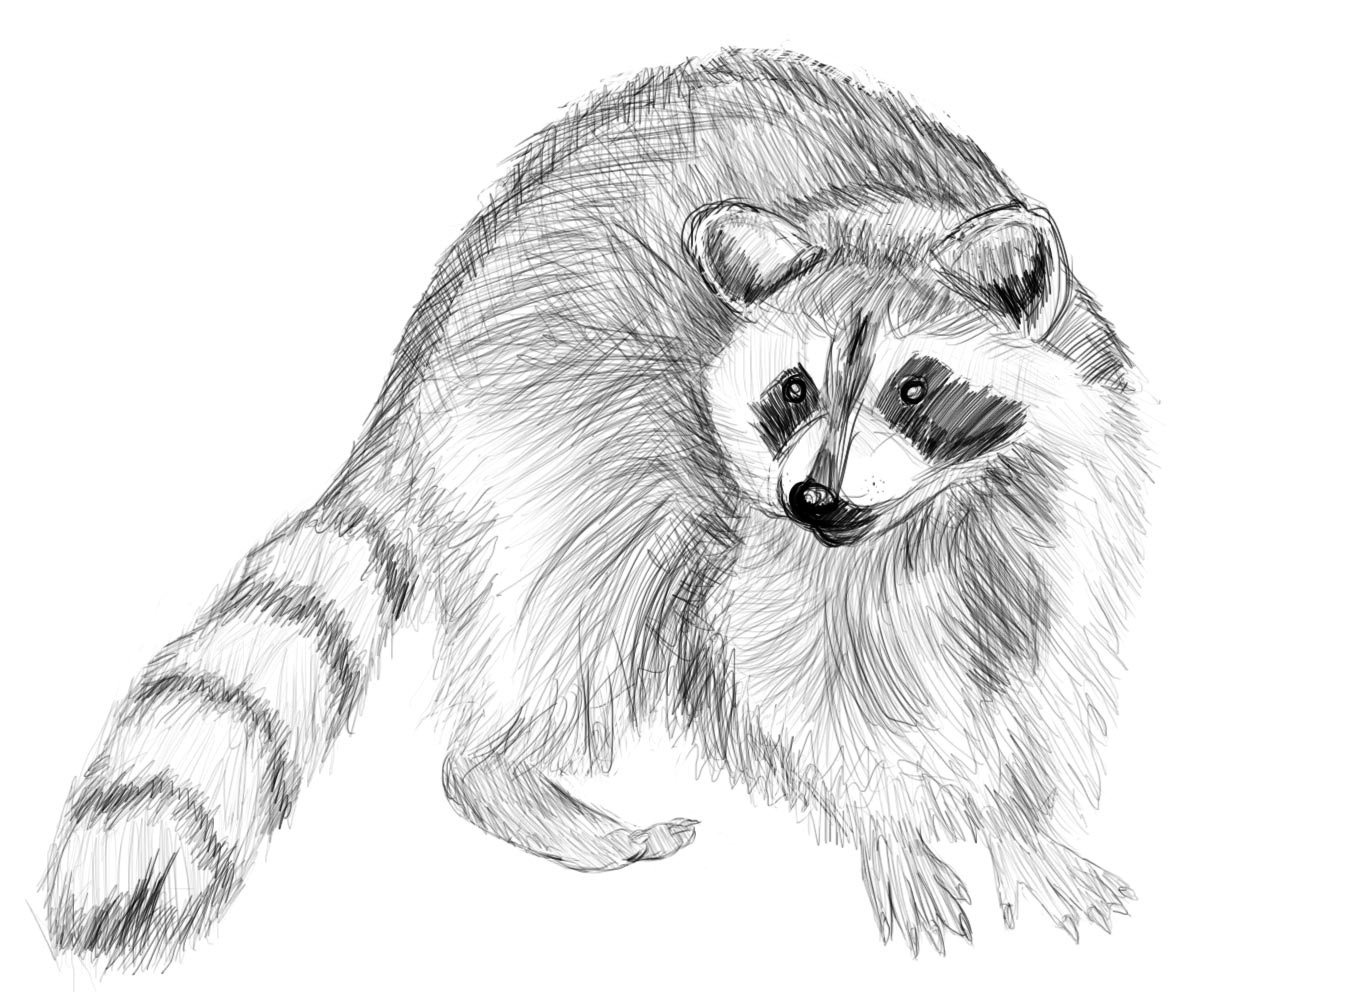 Raccoon drawing reference